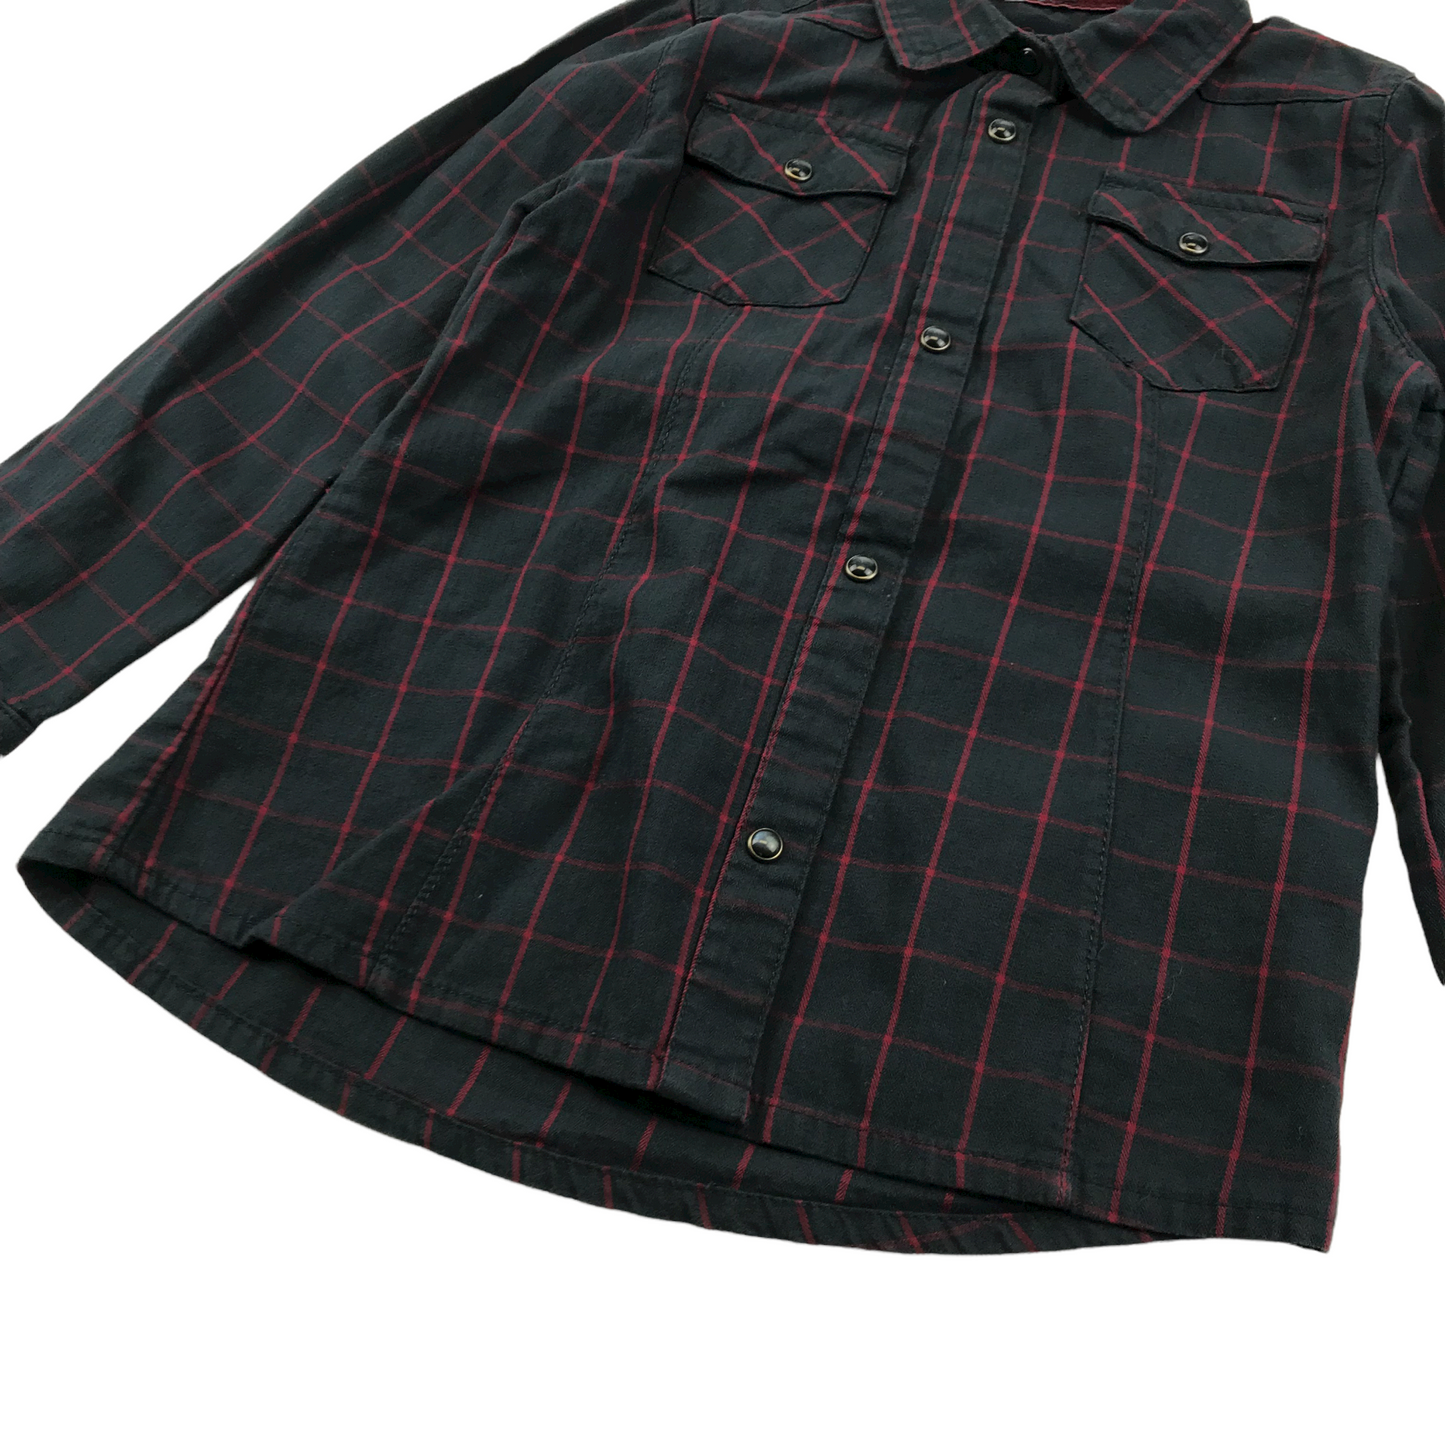 La Redoute Dark Navy and Red Checked Shirt Age 5